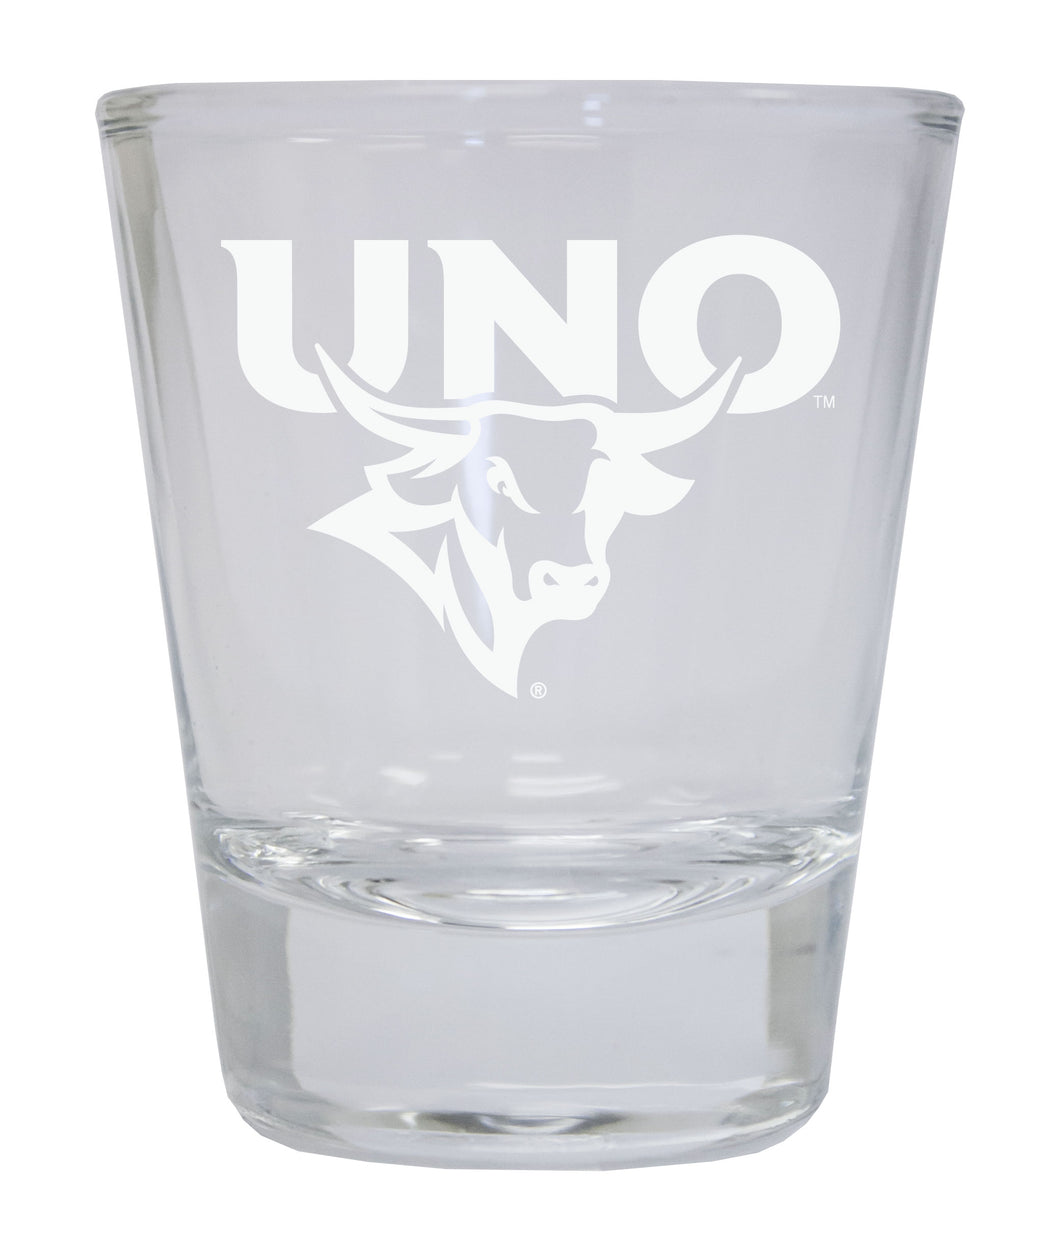 Nebraska at Omaha Etched Round Shot Glass Officially Licensed Collegiate Product